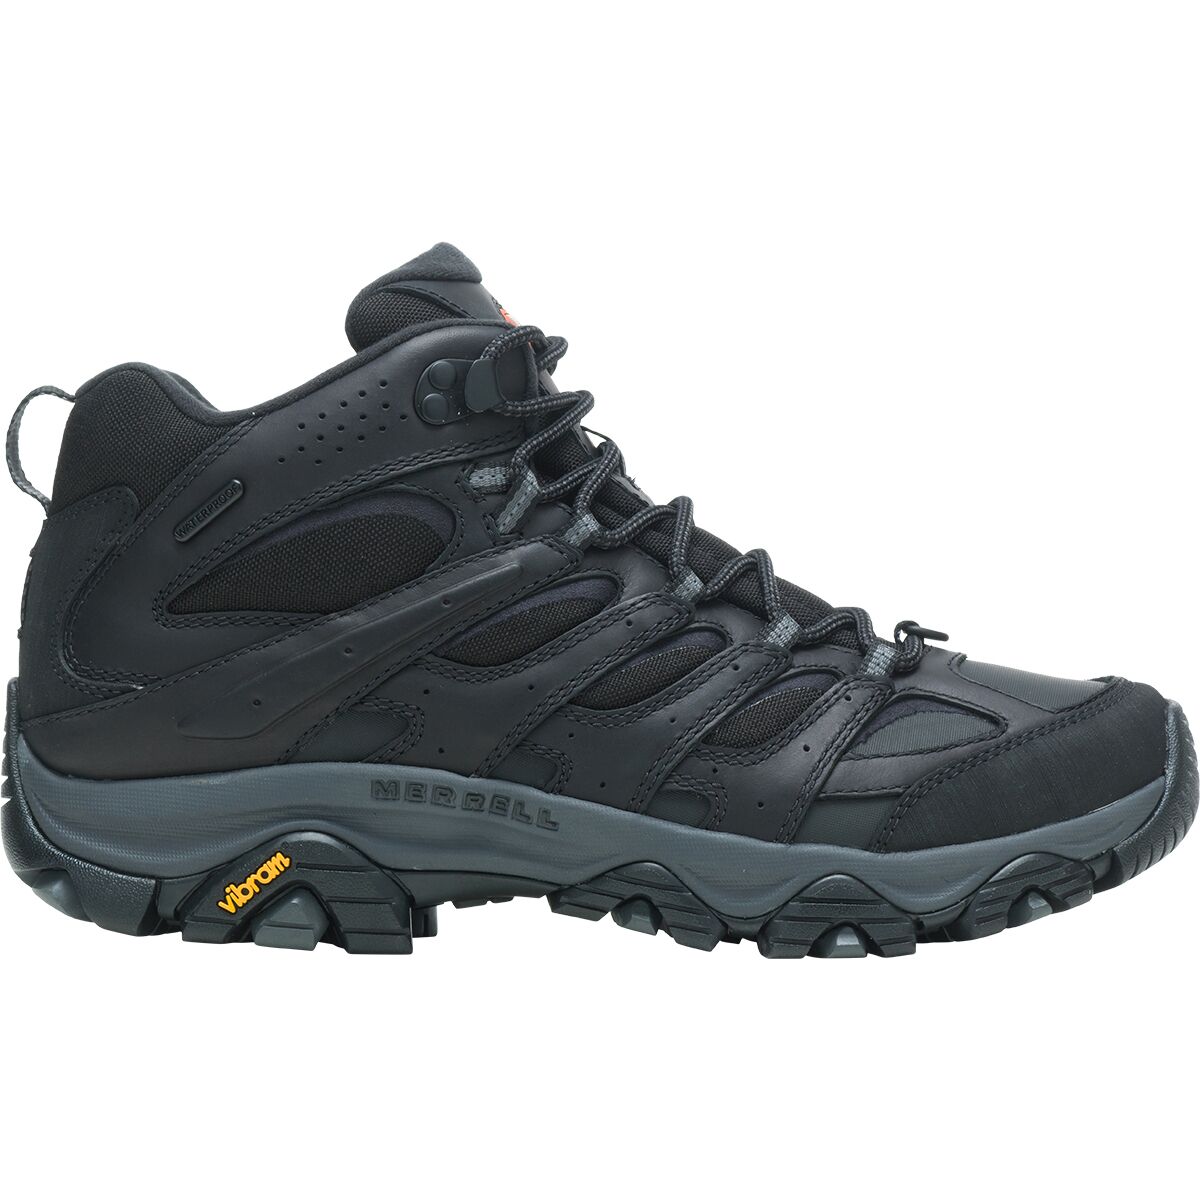 Merrell Moab 3 Thermo Mid WP Boot - Men's